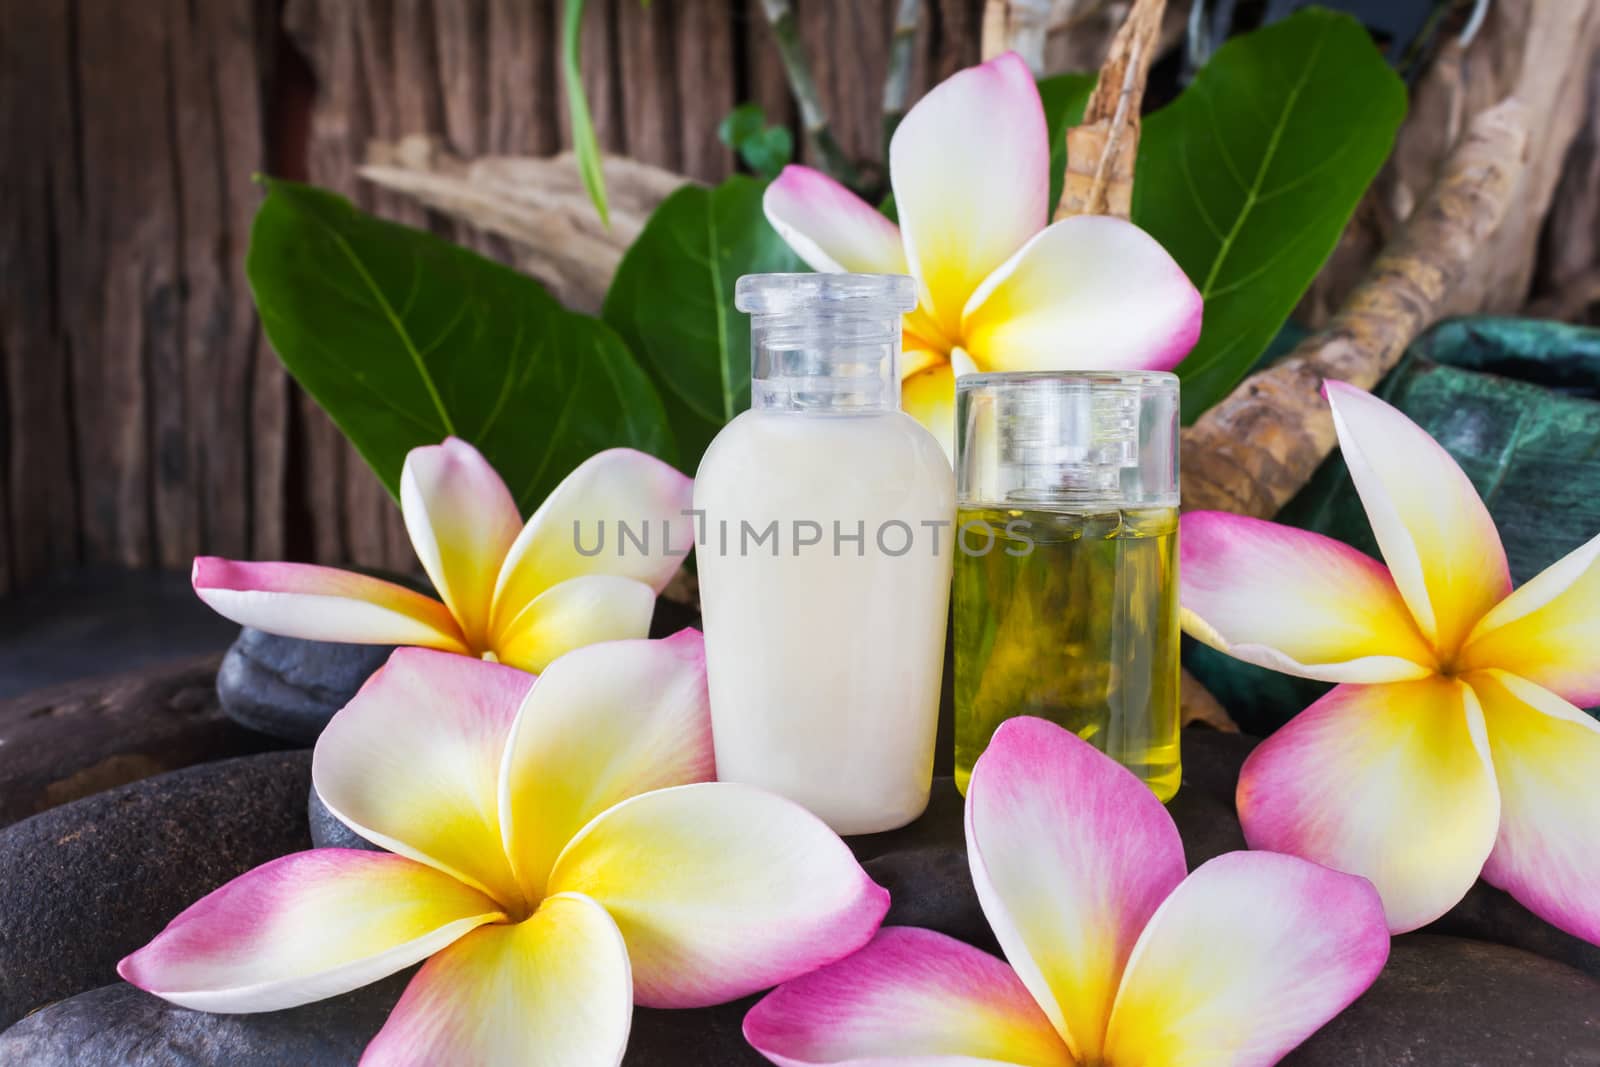 Mini set of bubble bath and shower gel liquid with pink white and yellow flowers plumeria or frangiani on pebble rock with green leaf and timber or wooden background, shampoo conditioner shower or body gel in relax spa mood